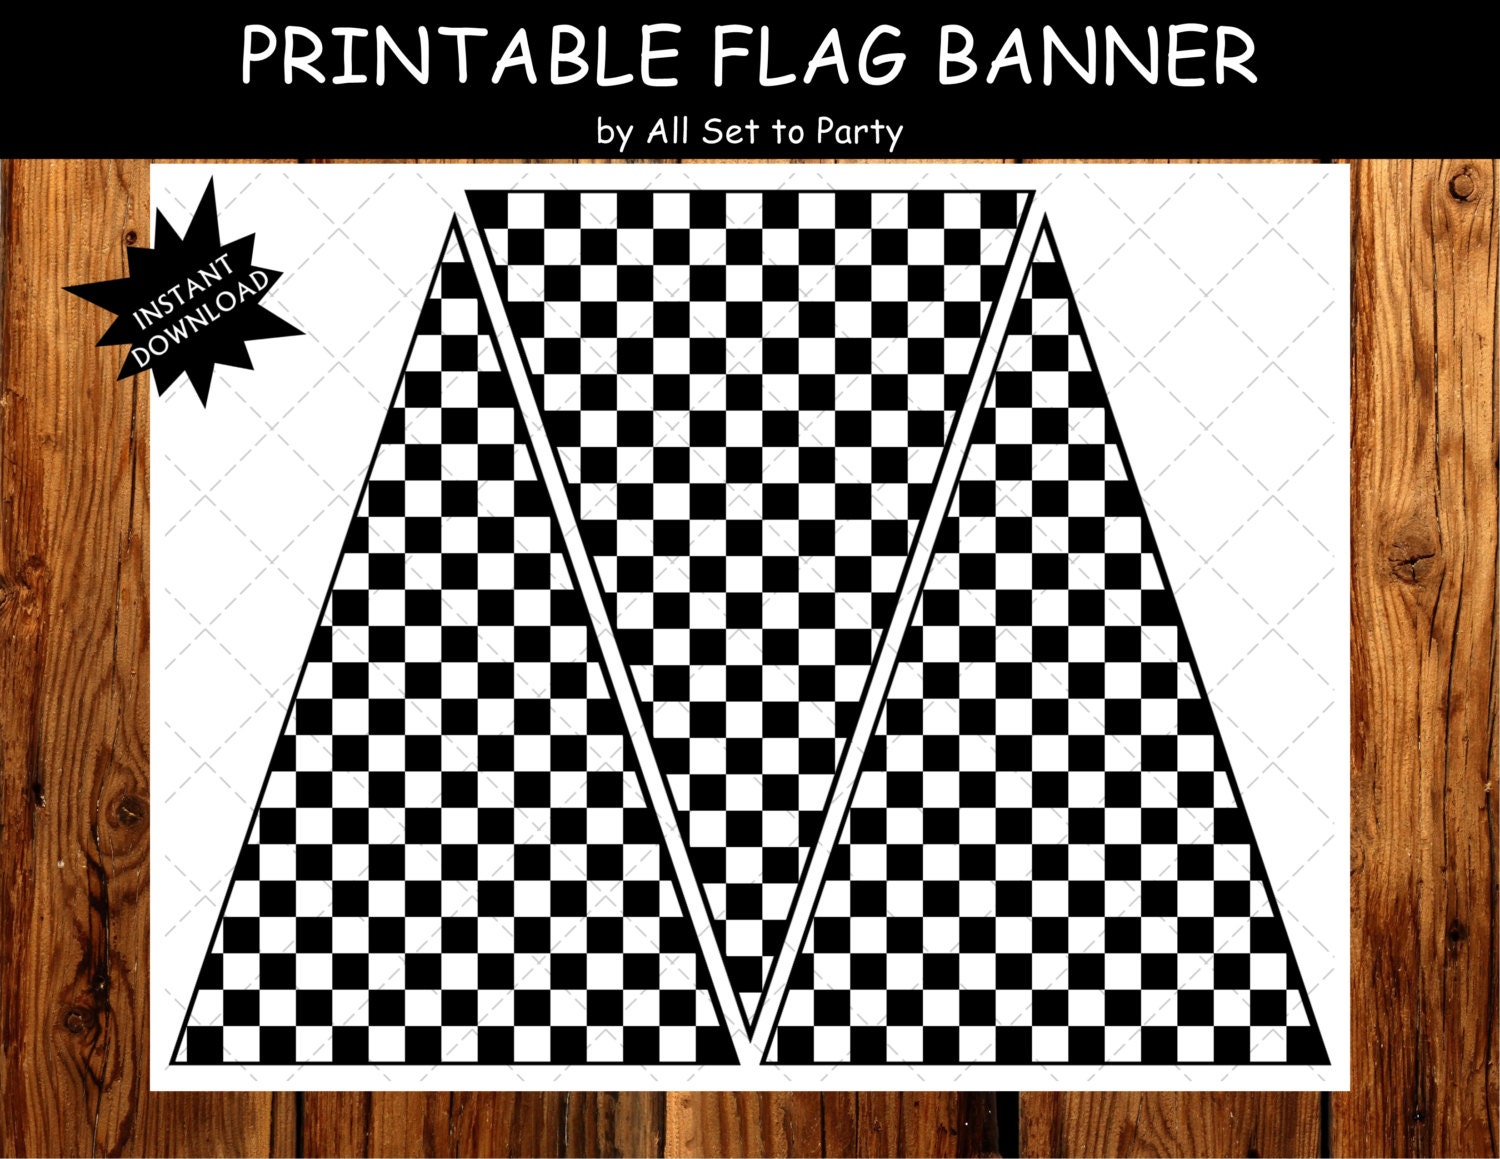 download black and white racing flag